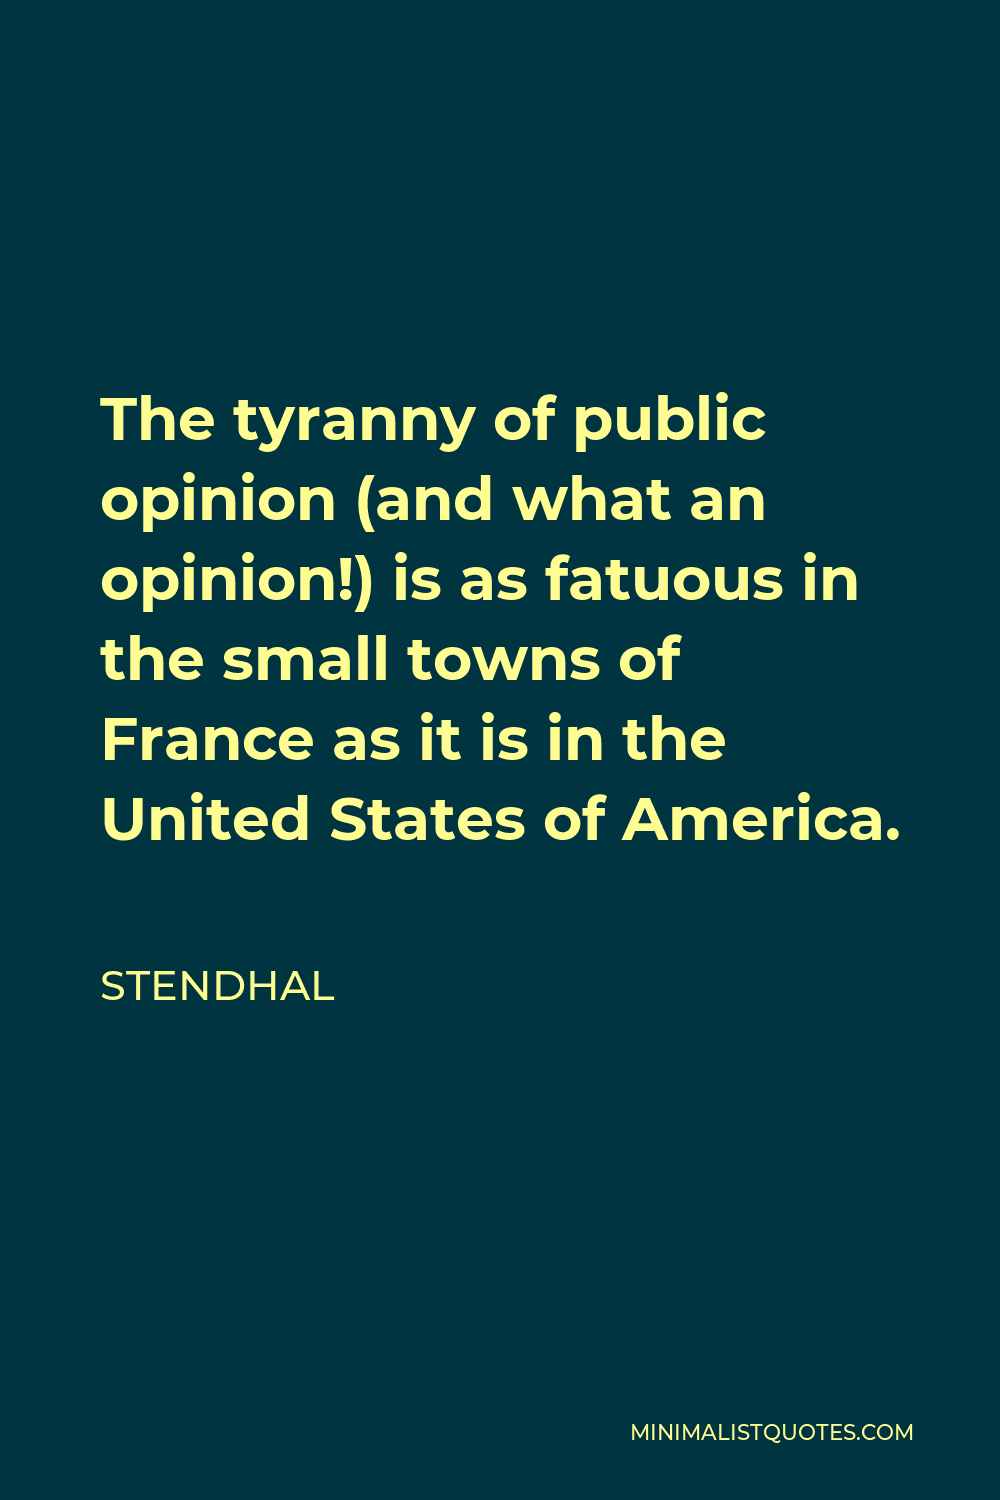 Stendhal Quote - The tyranny of public opinion (and what an opinion!) is as fatuous in the small towns of France as it is in the United States of America.